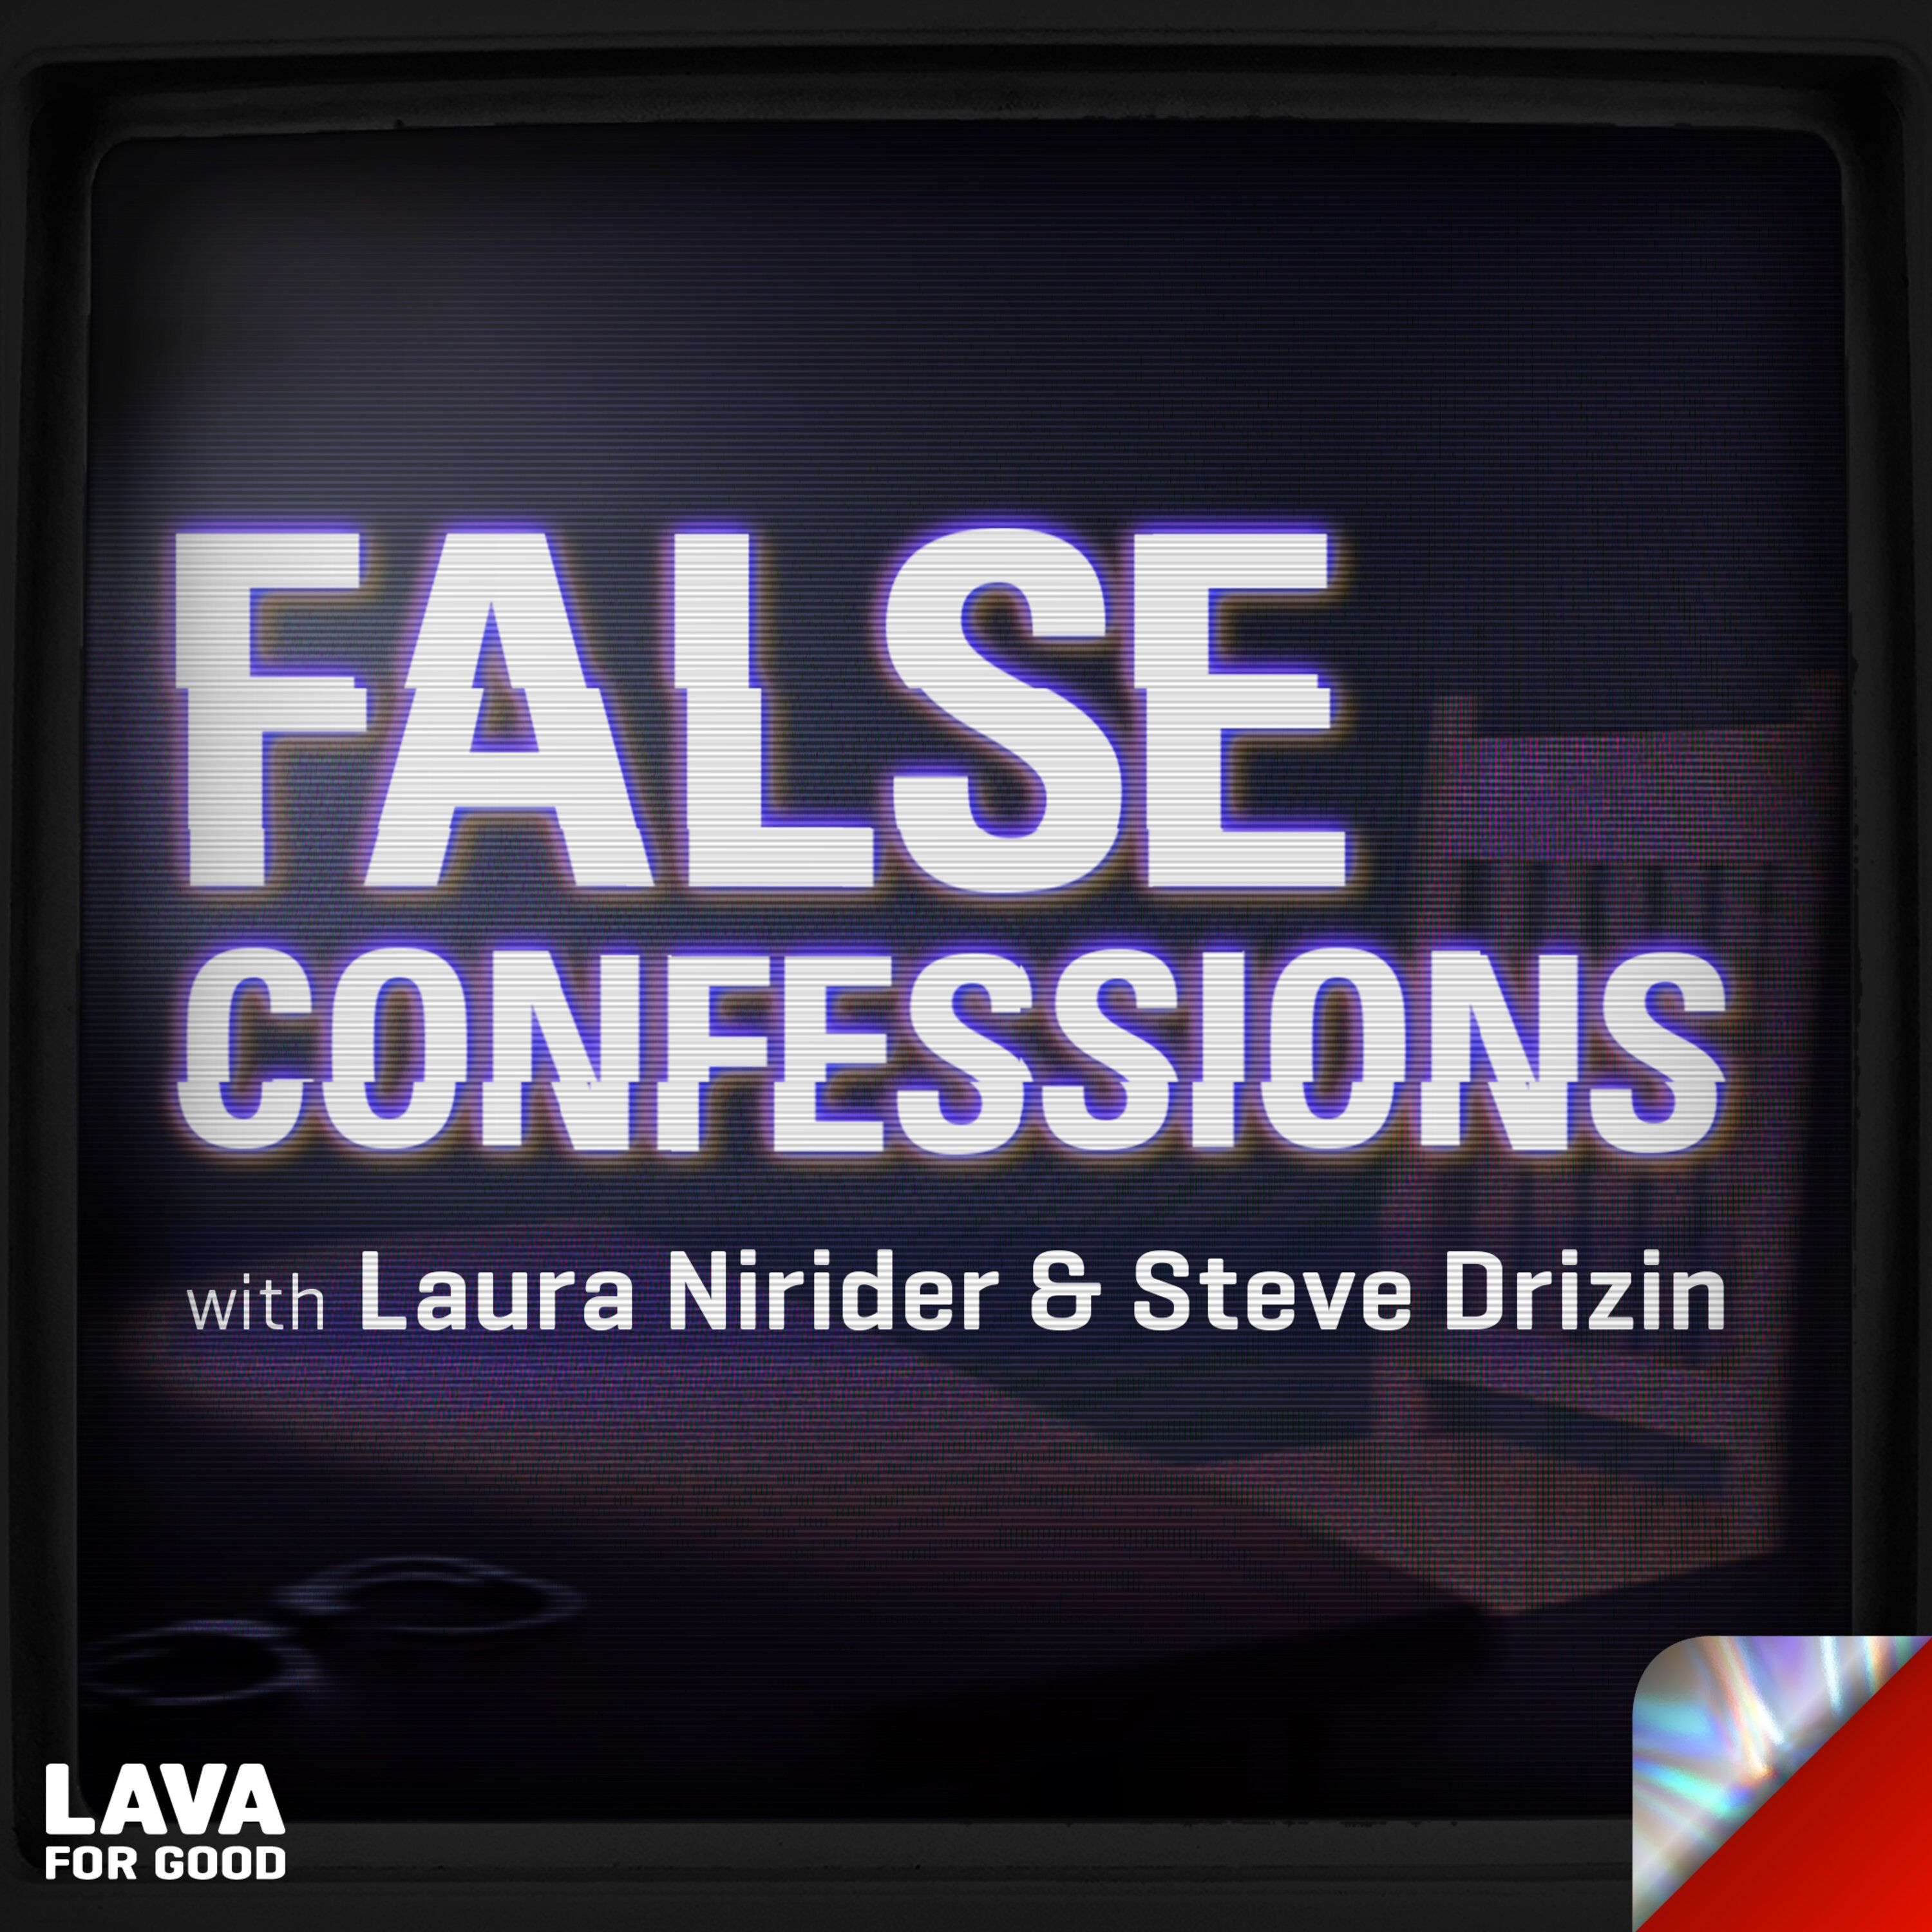 #115 Wrongful Conviction: False Confessions - Origin Story